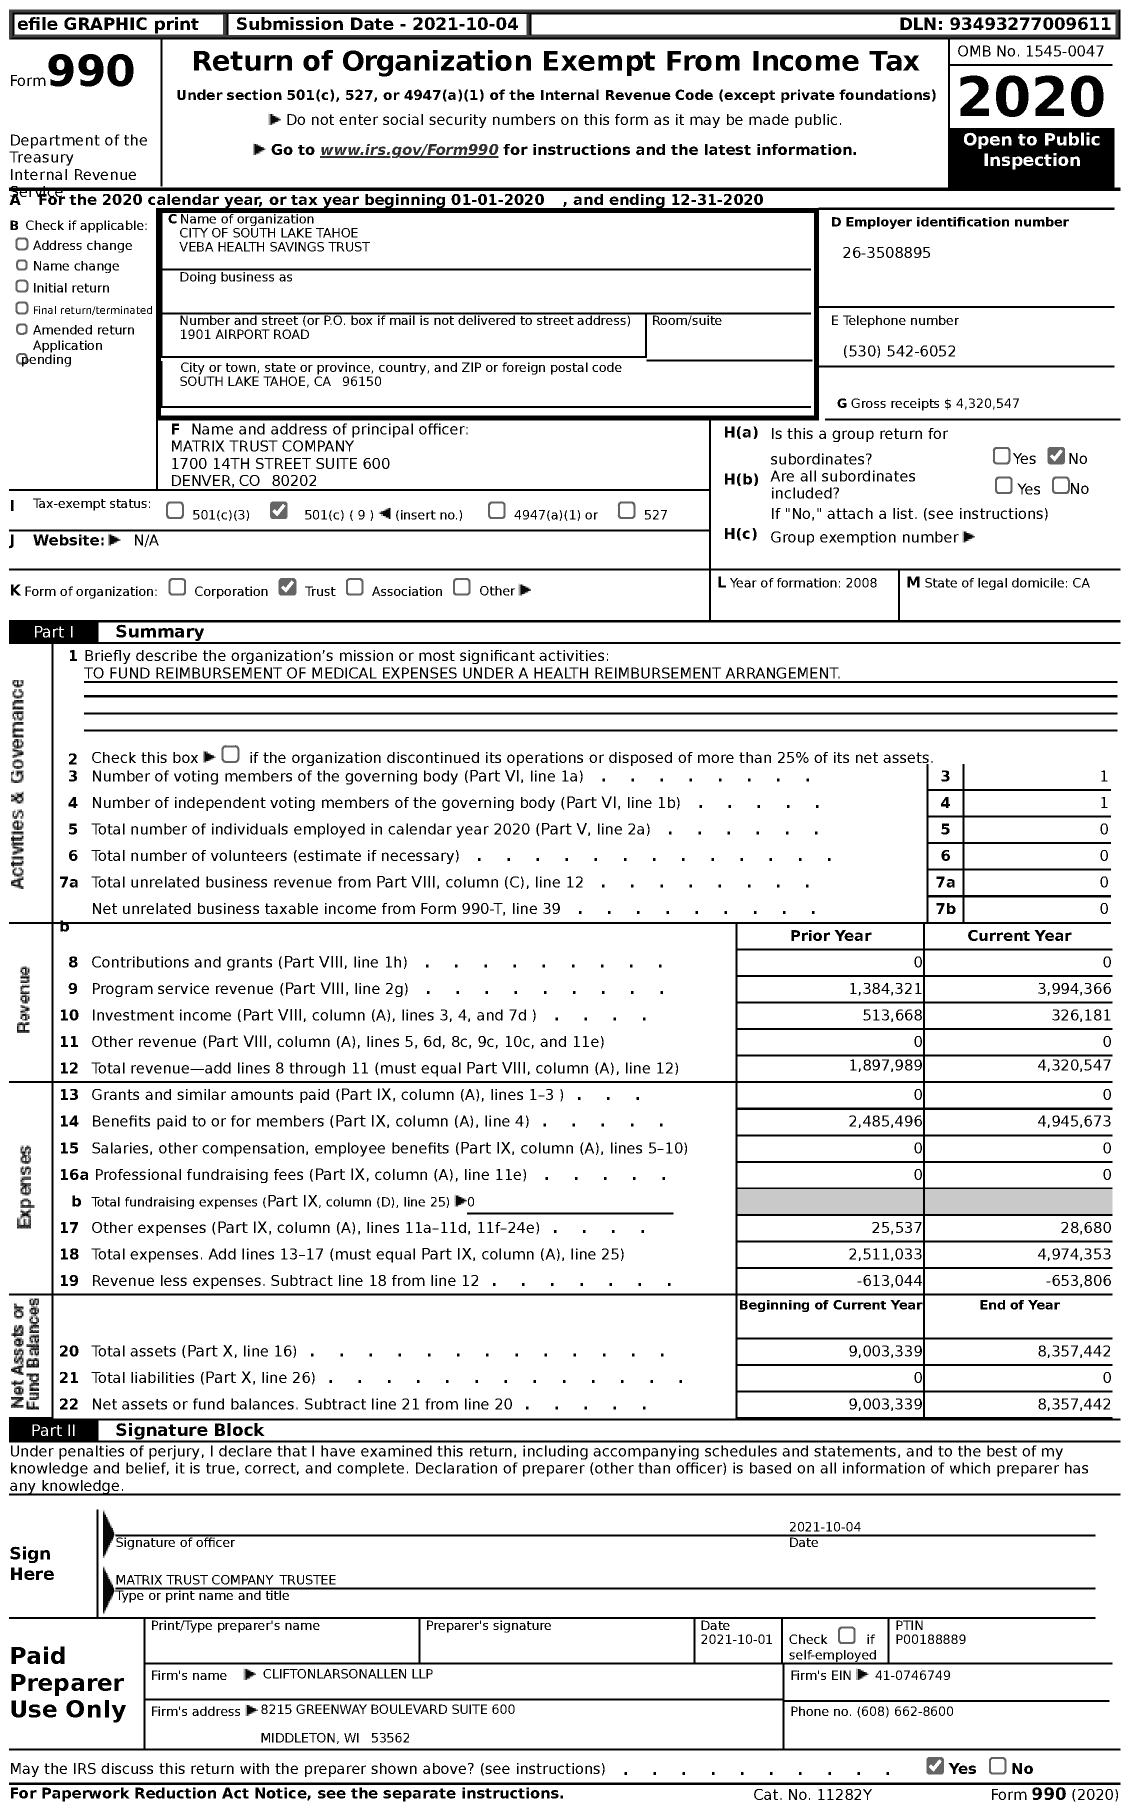 Image of first page of 2020 Form 990 for City of South Lake Tahoe Veba Health Savings Trust